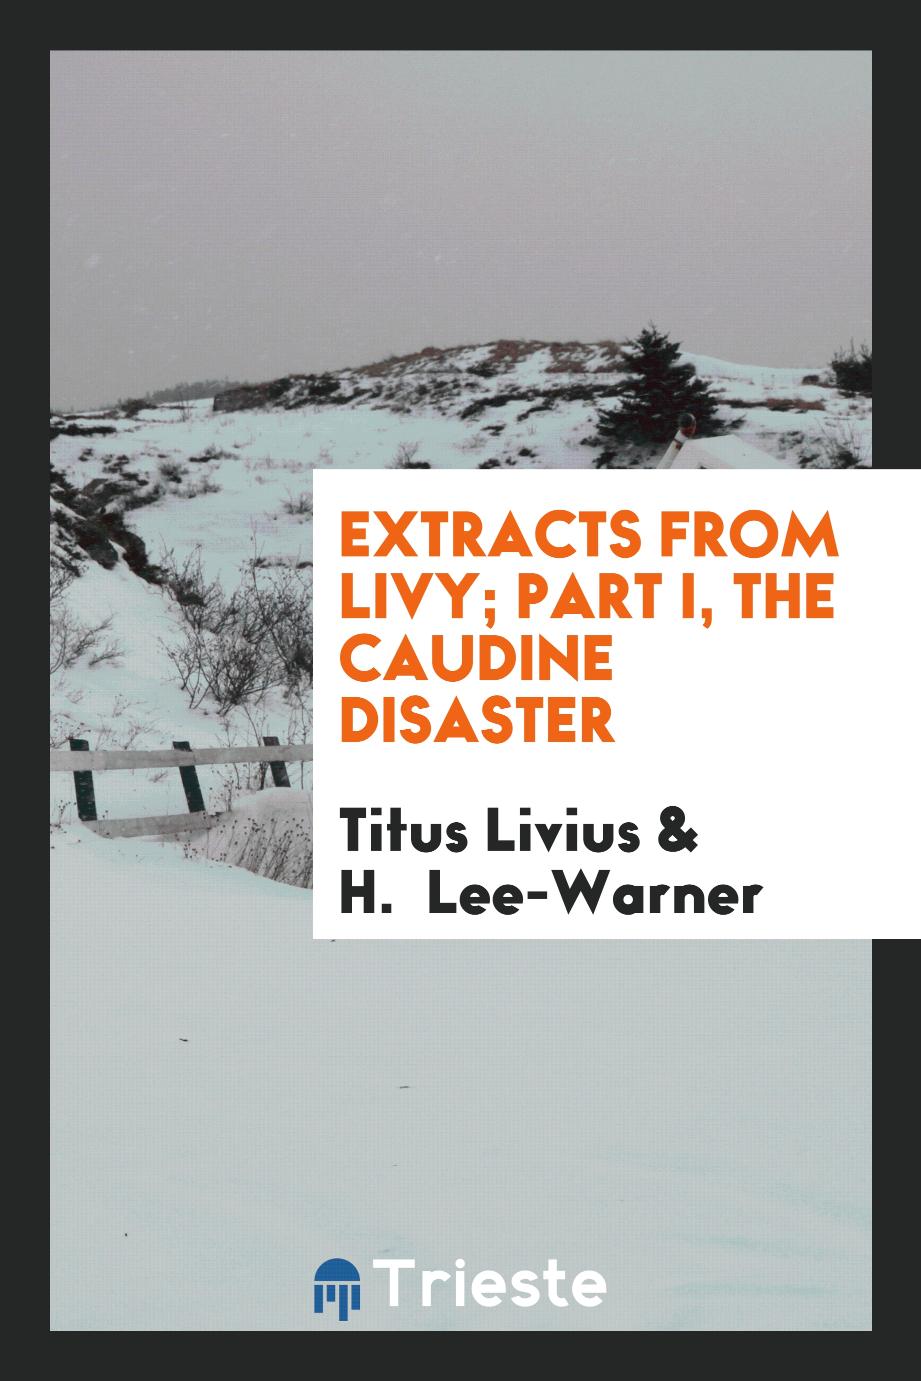 Extracts from Livy; Part I, The Caudine disaster